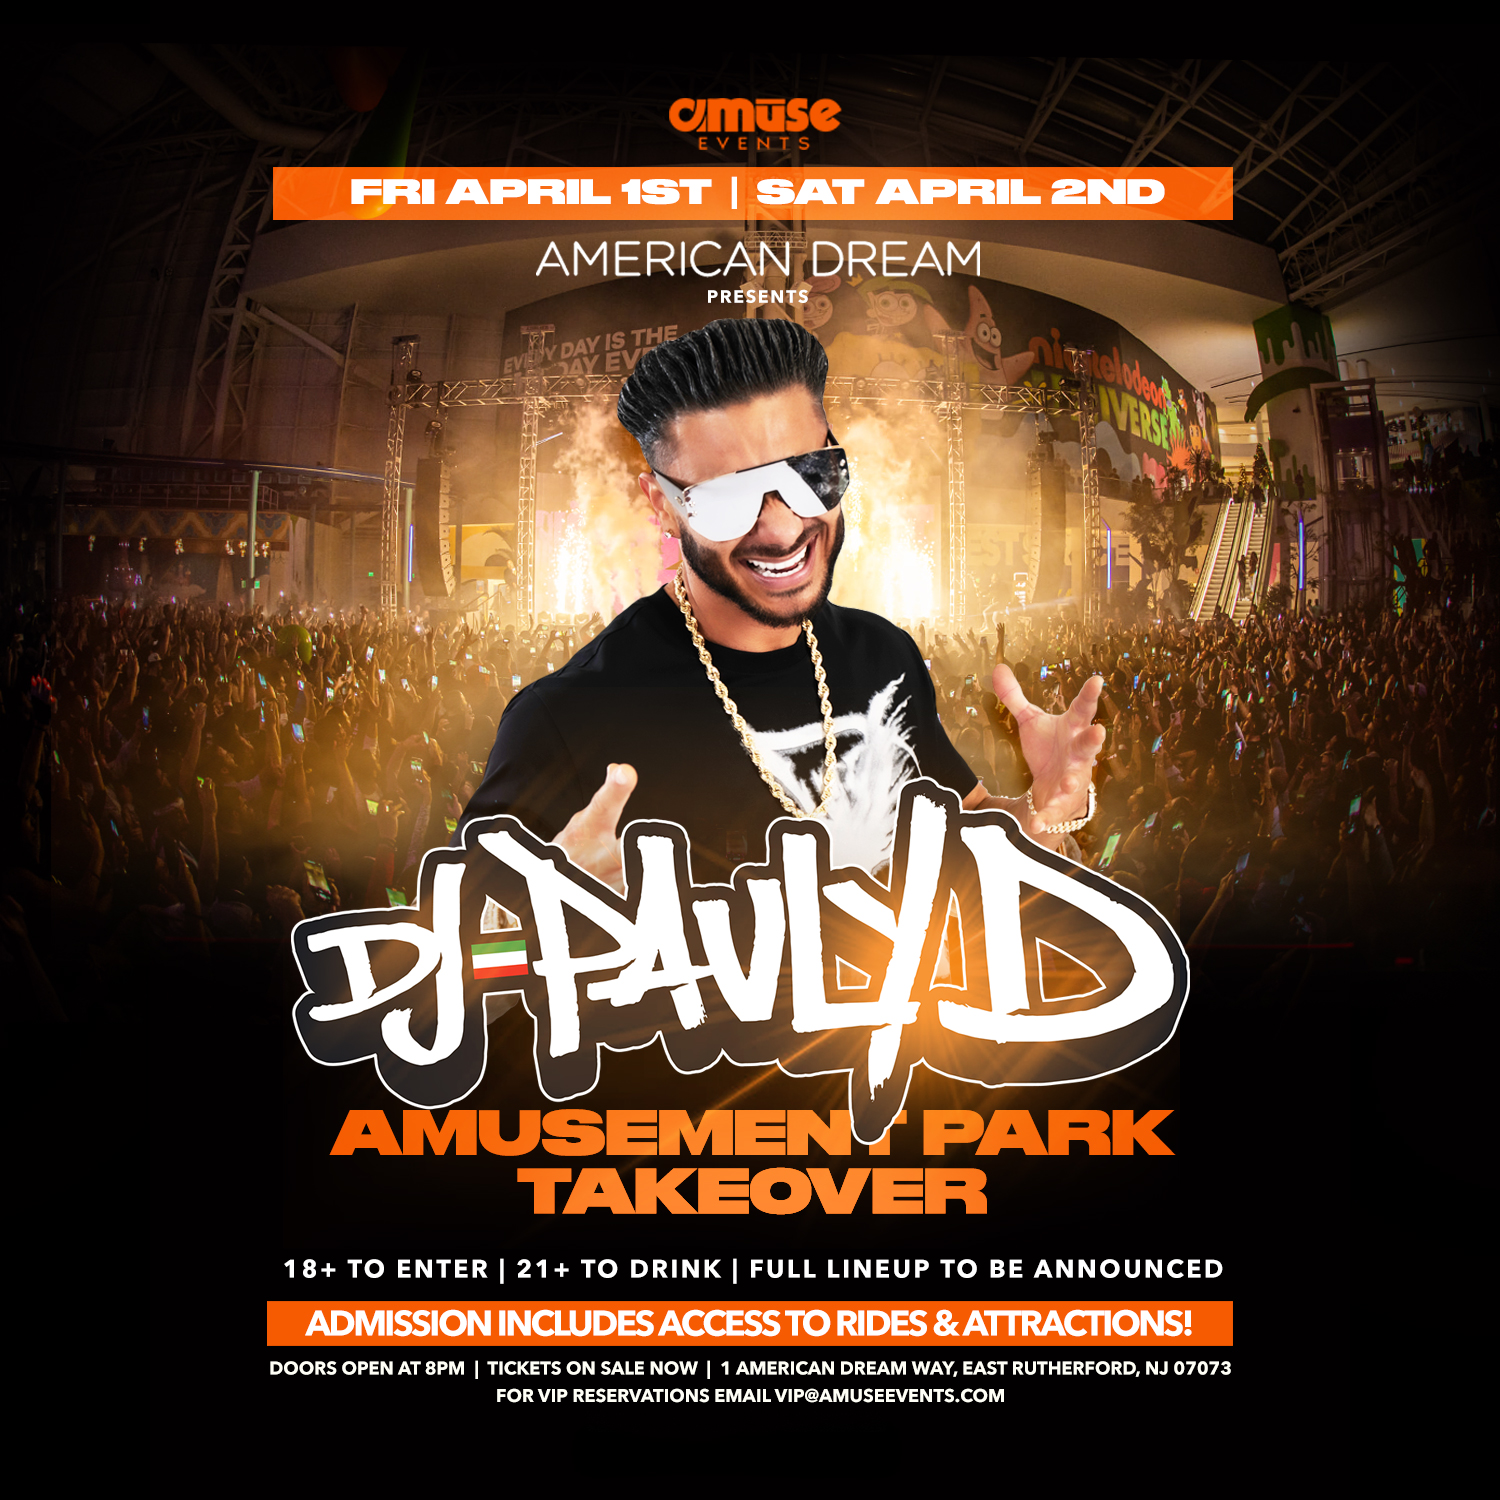 Flyer for American Dream Event: Pauly D Amusement Park Takeover